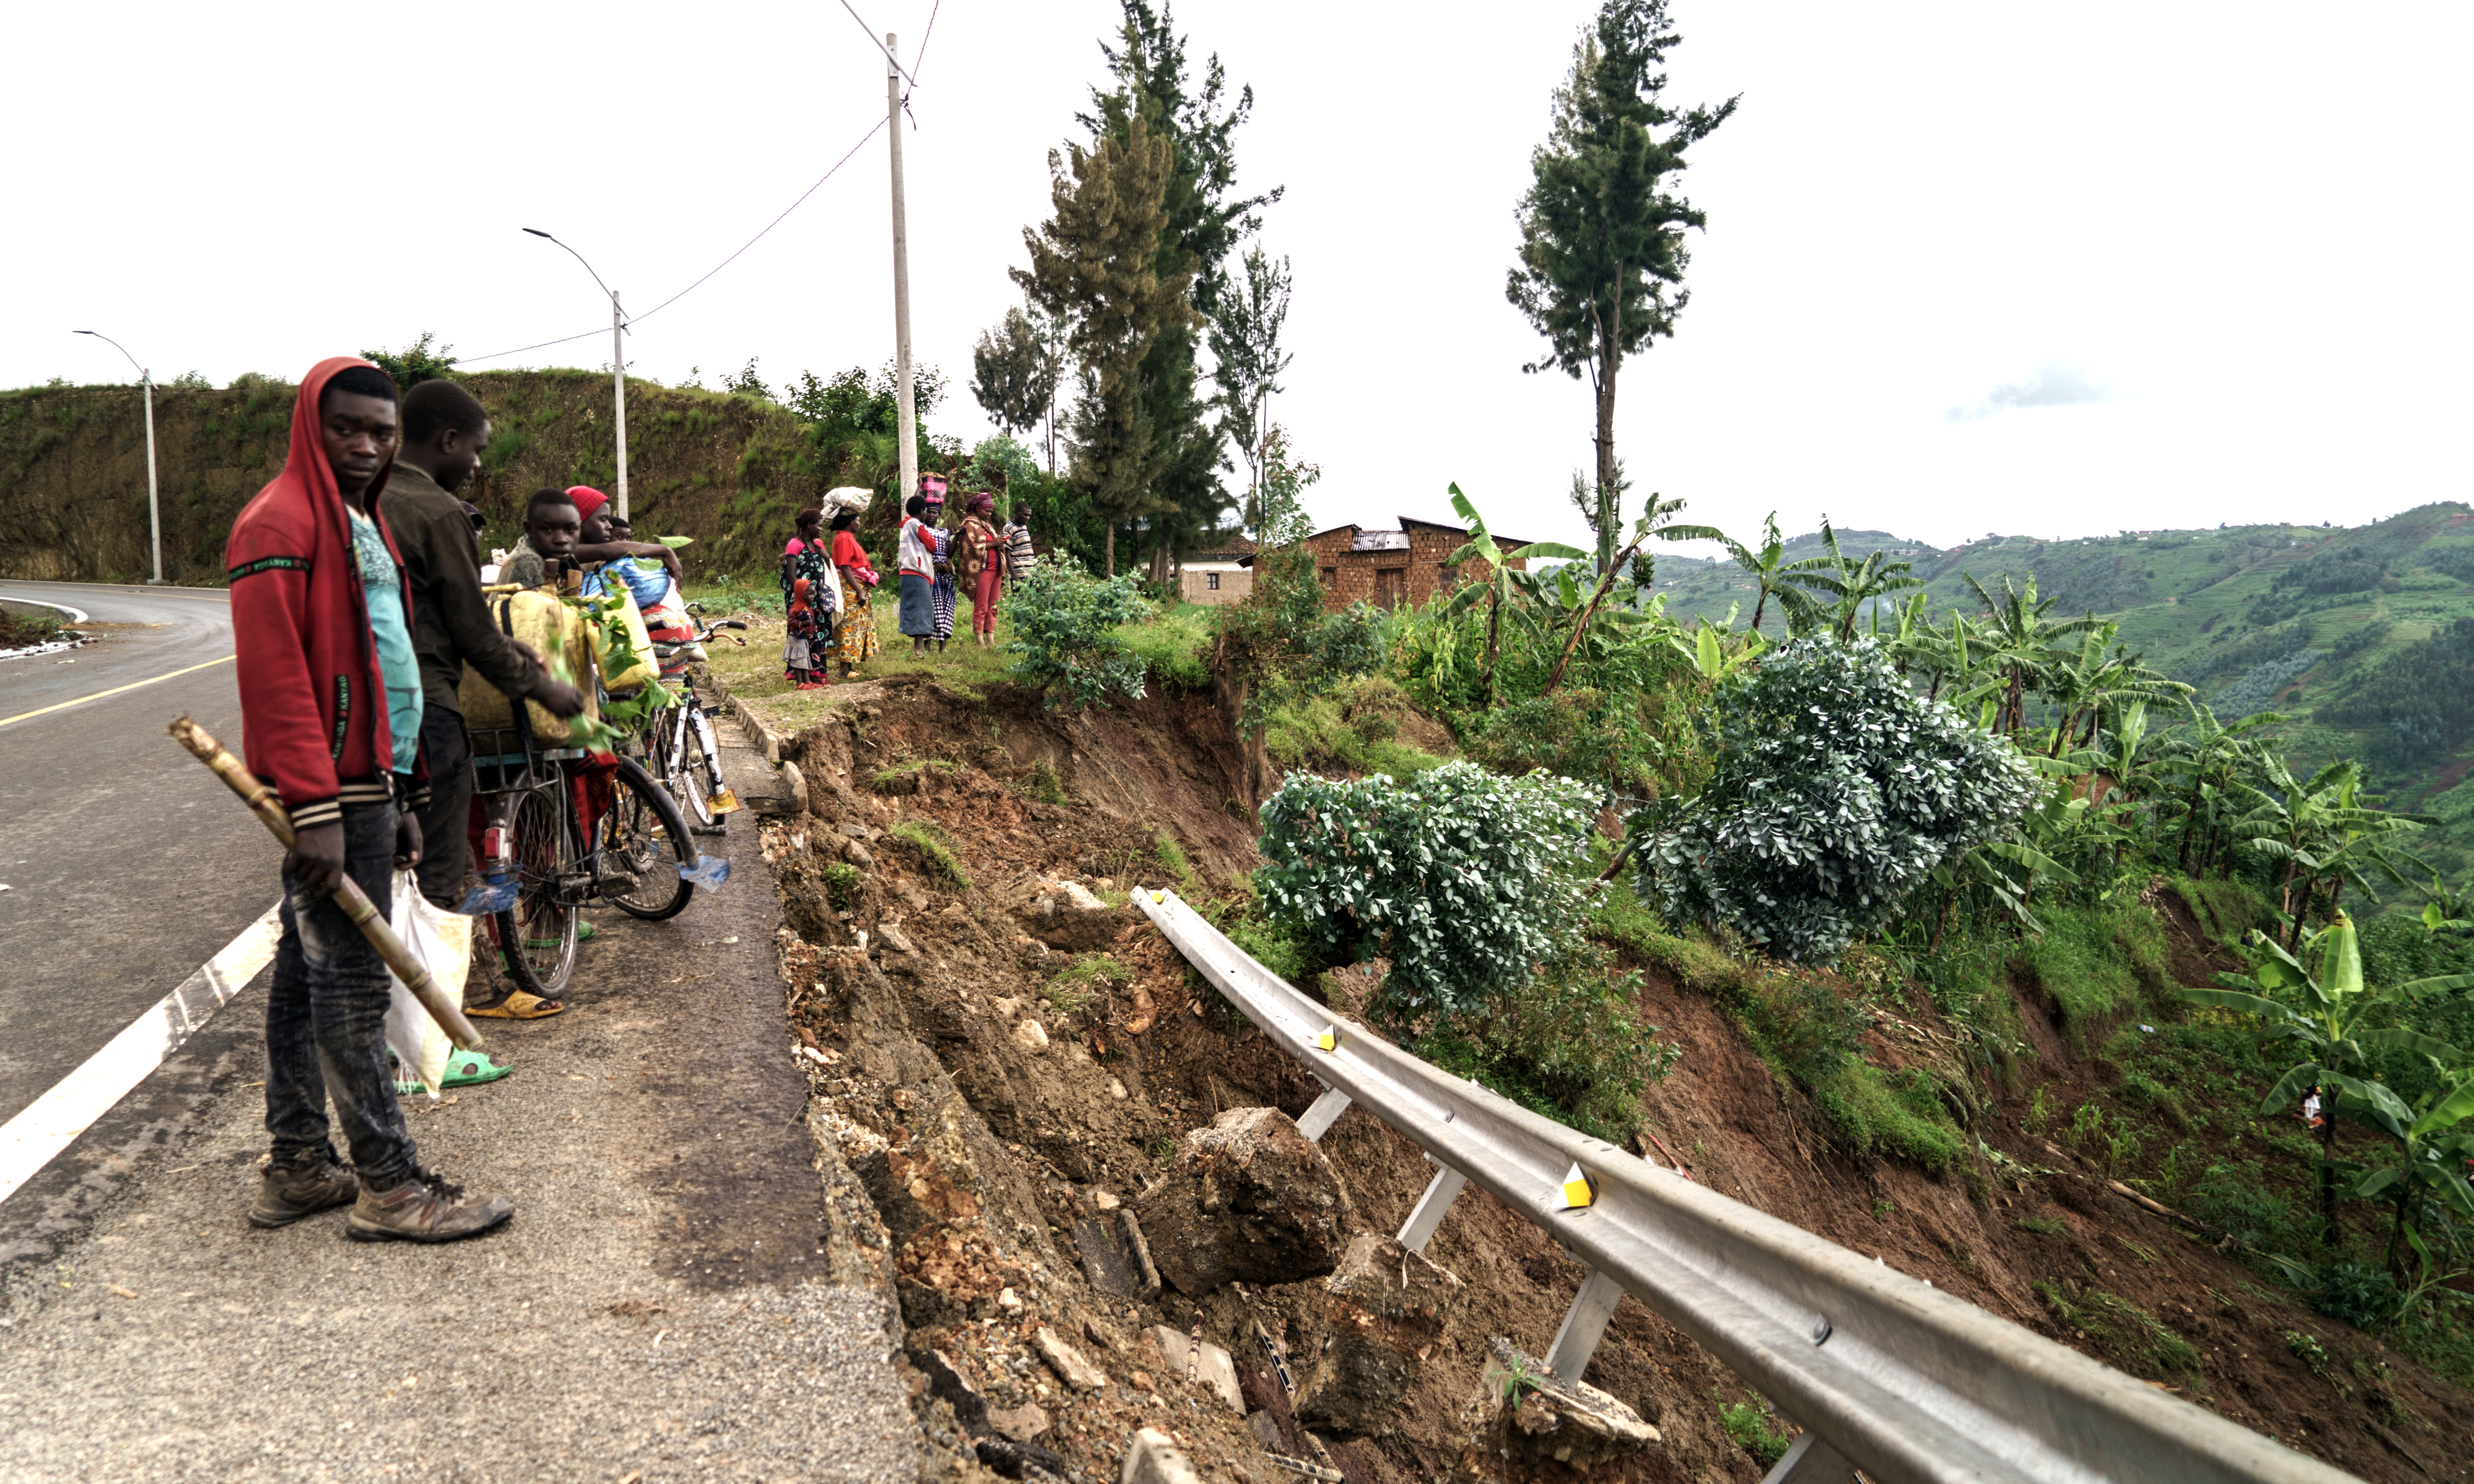 RUBENGERA: Bystanders look at the damaged slope after a landslide caused by heavy rain in Rubengera, Rwanda. At least 130 people have died as floods and landslides engulfed several parts of Rwanda after torrential rains, destroying homes and cutting off roads. – AFP